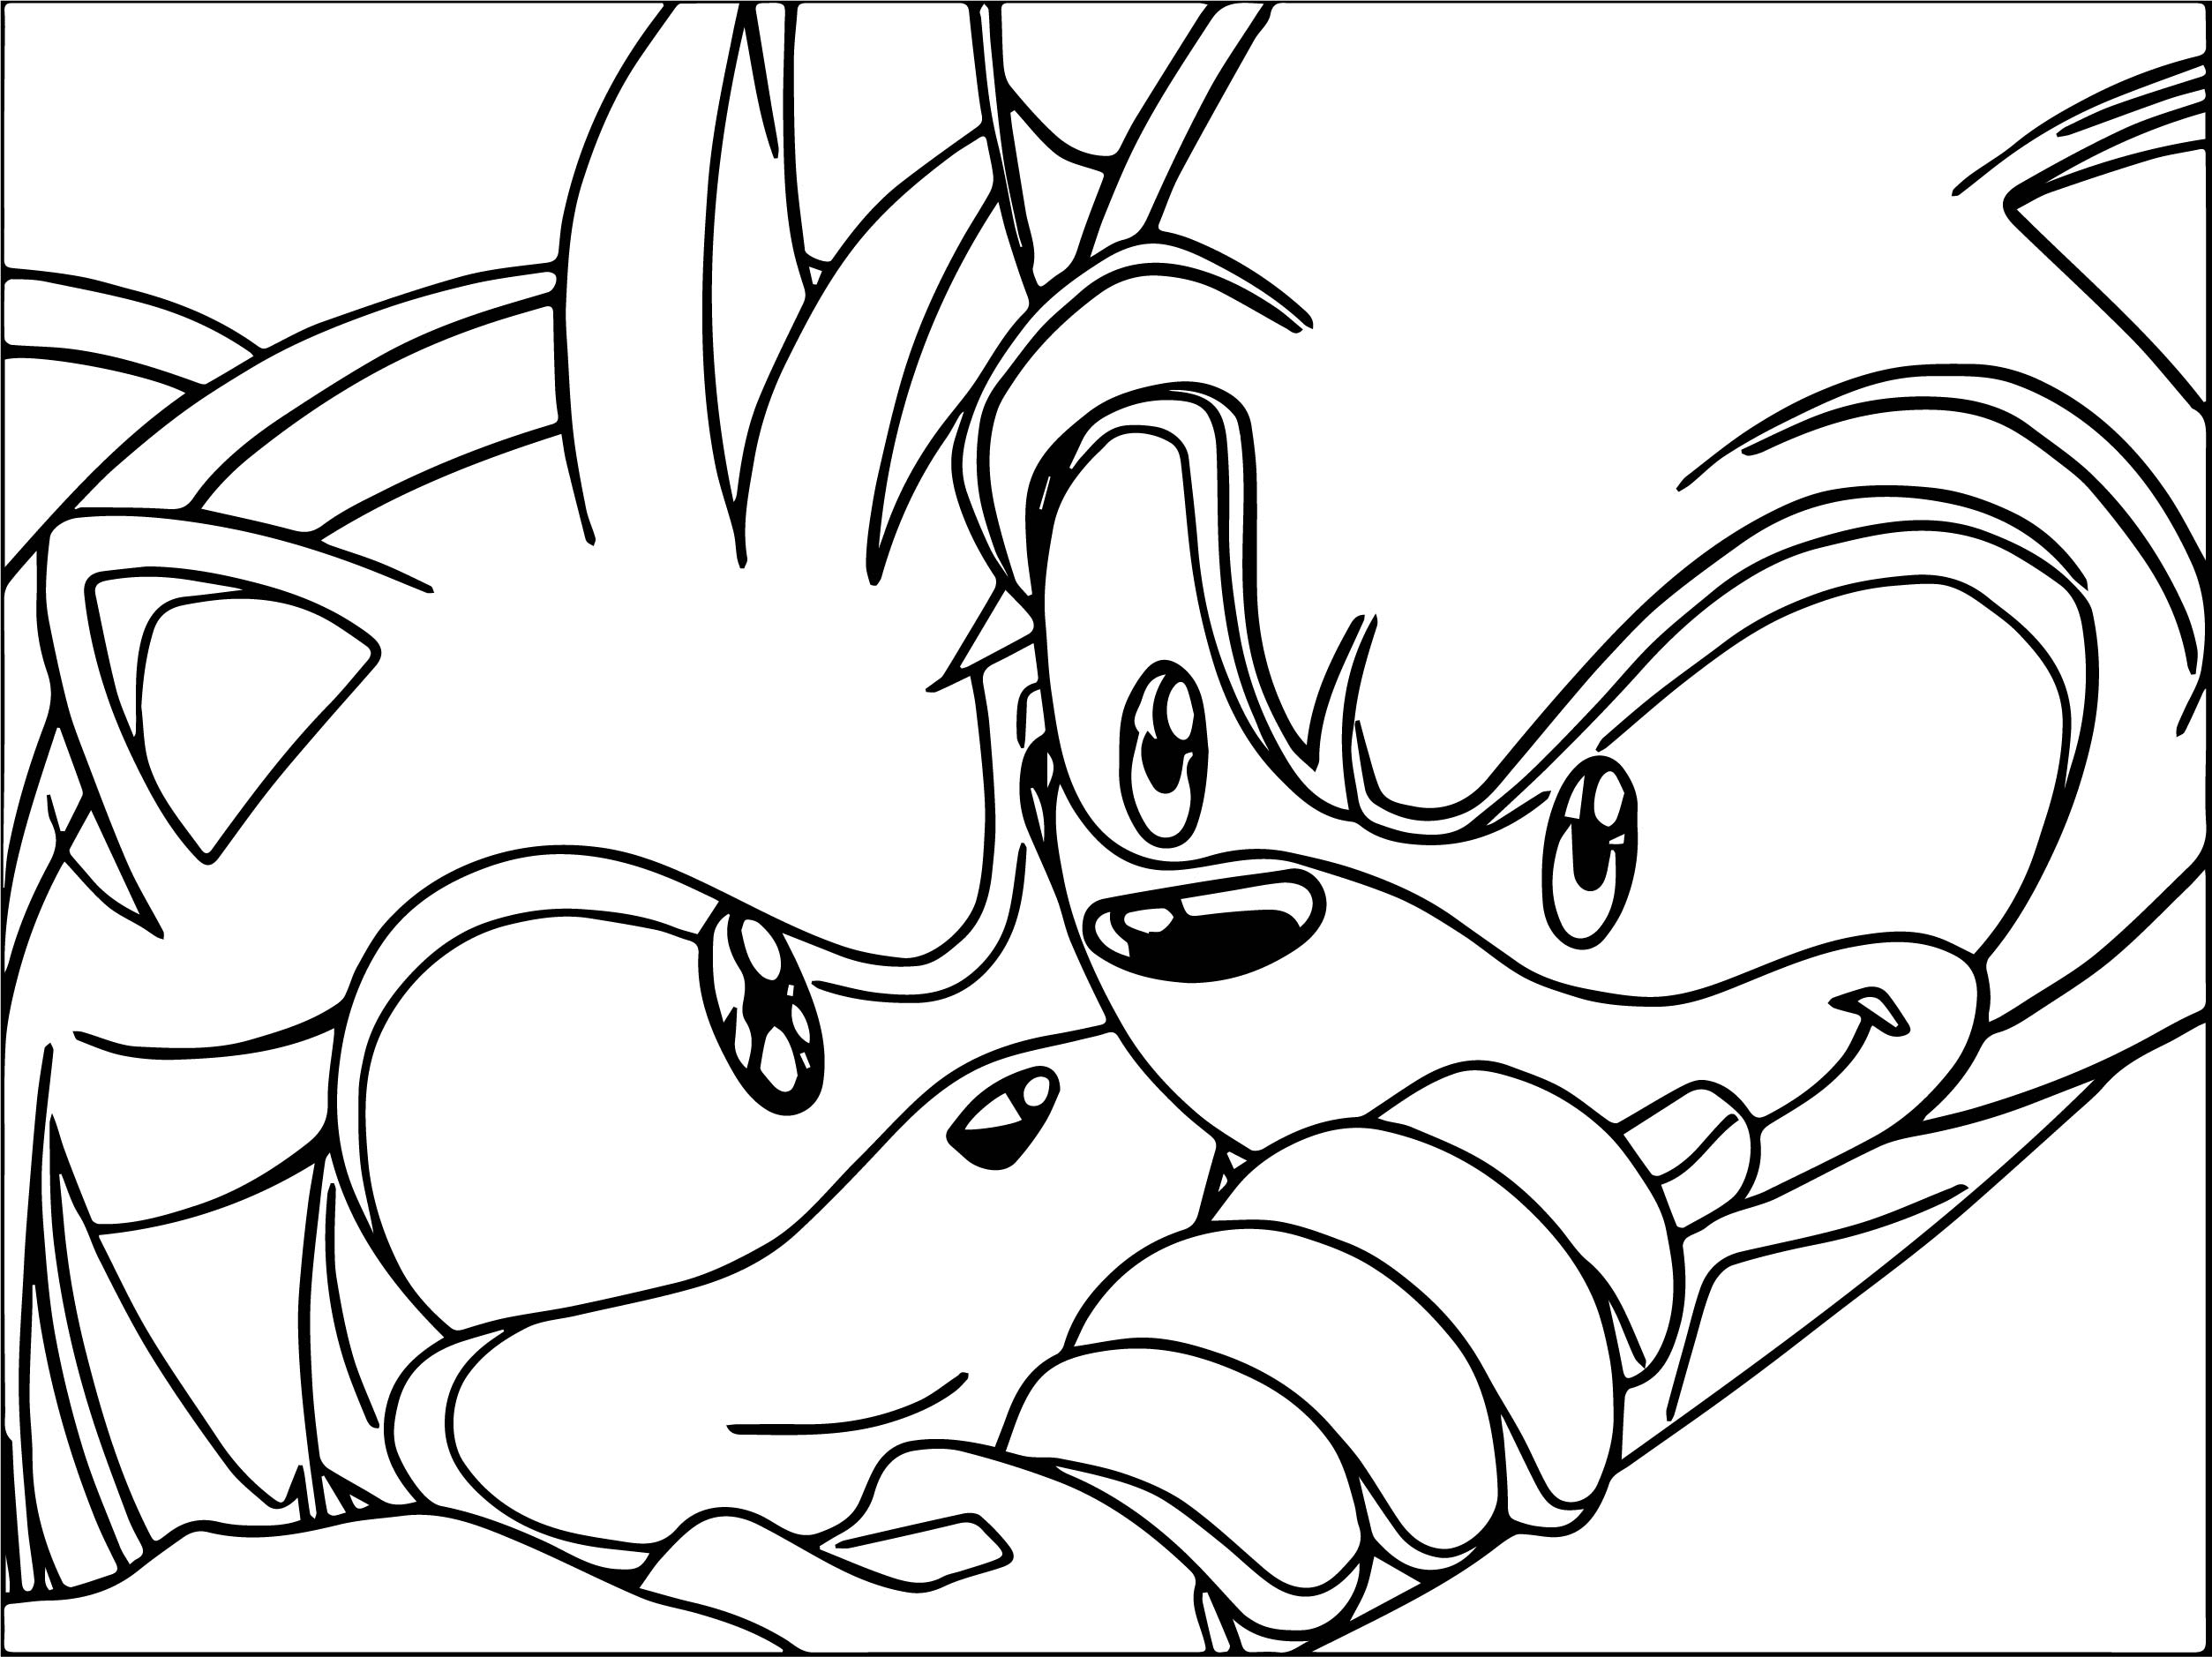 Amy Rose And Sonic Hug Love Coloring Page | Wecoloringpage.com